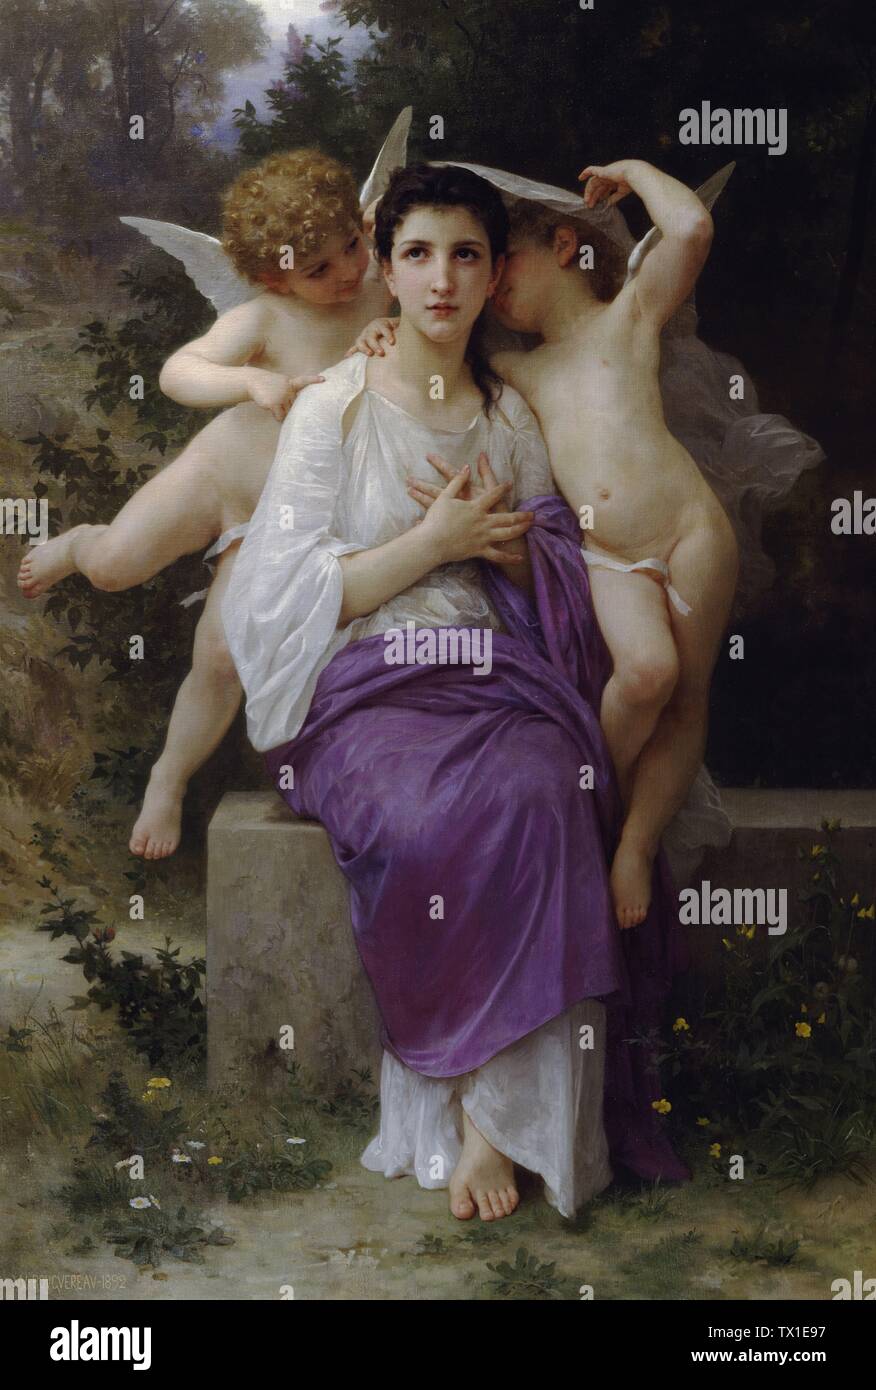 The Heart's Awakening (1892) French Academic painting by William-Adolphe Bouguereau - Very high resolution and quality image Stock Photo